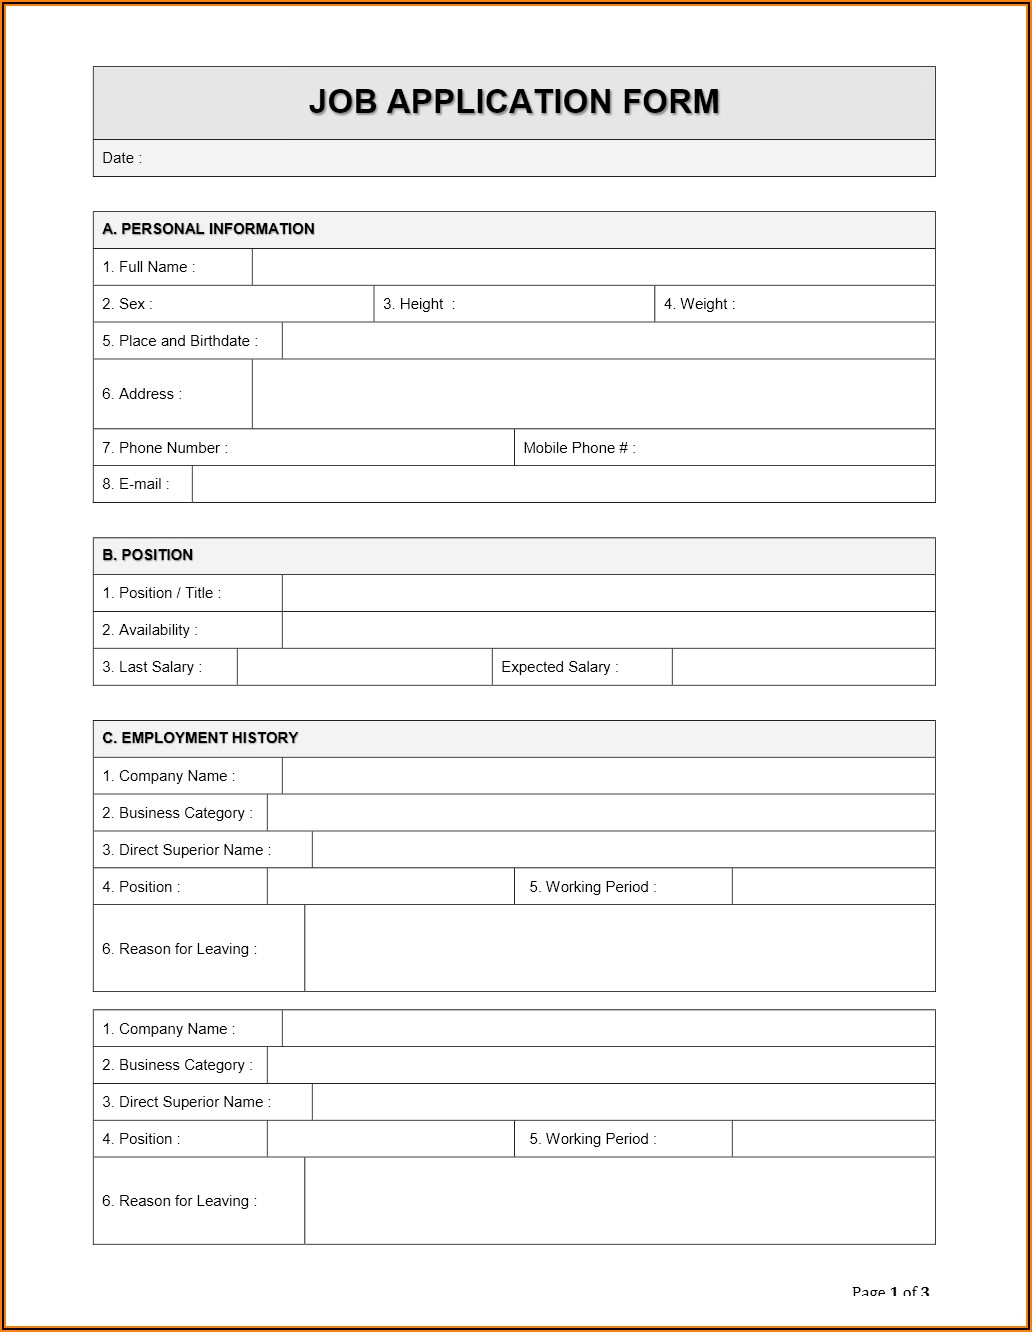 Job Application Form Template Word Free Download